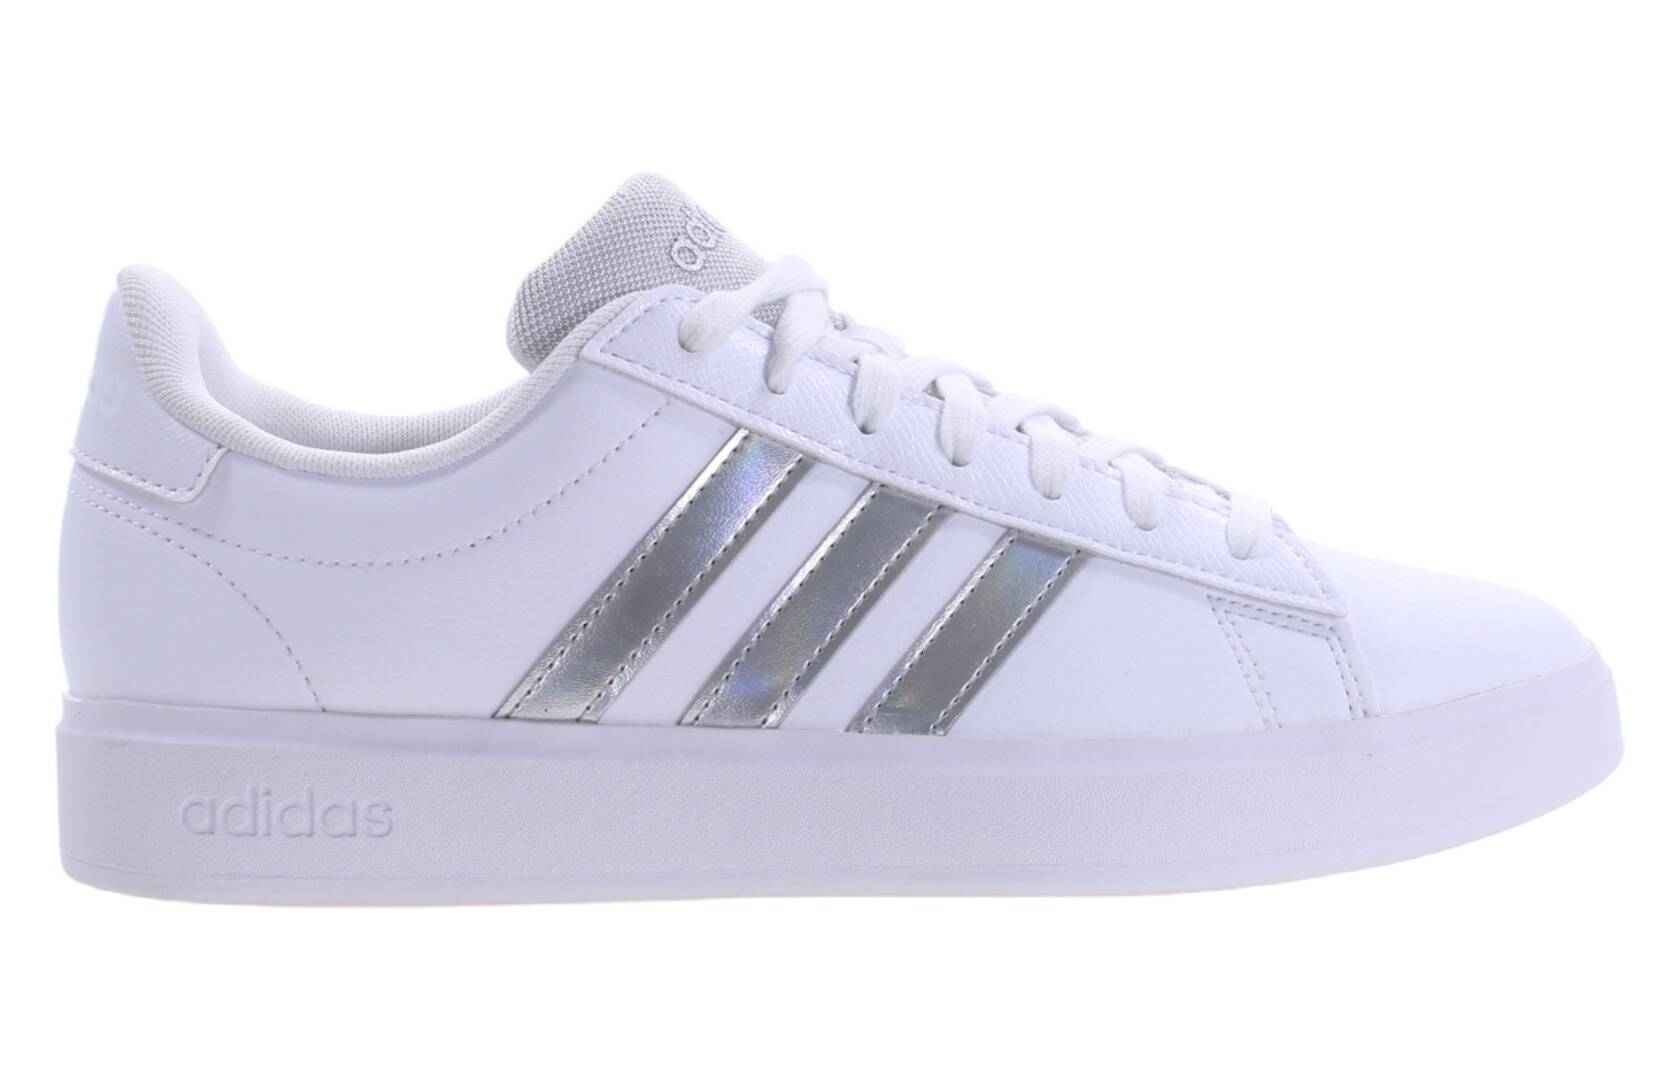 Adidas GRAND COURT 2.0 ID4485 women's shoes